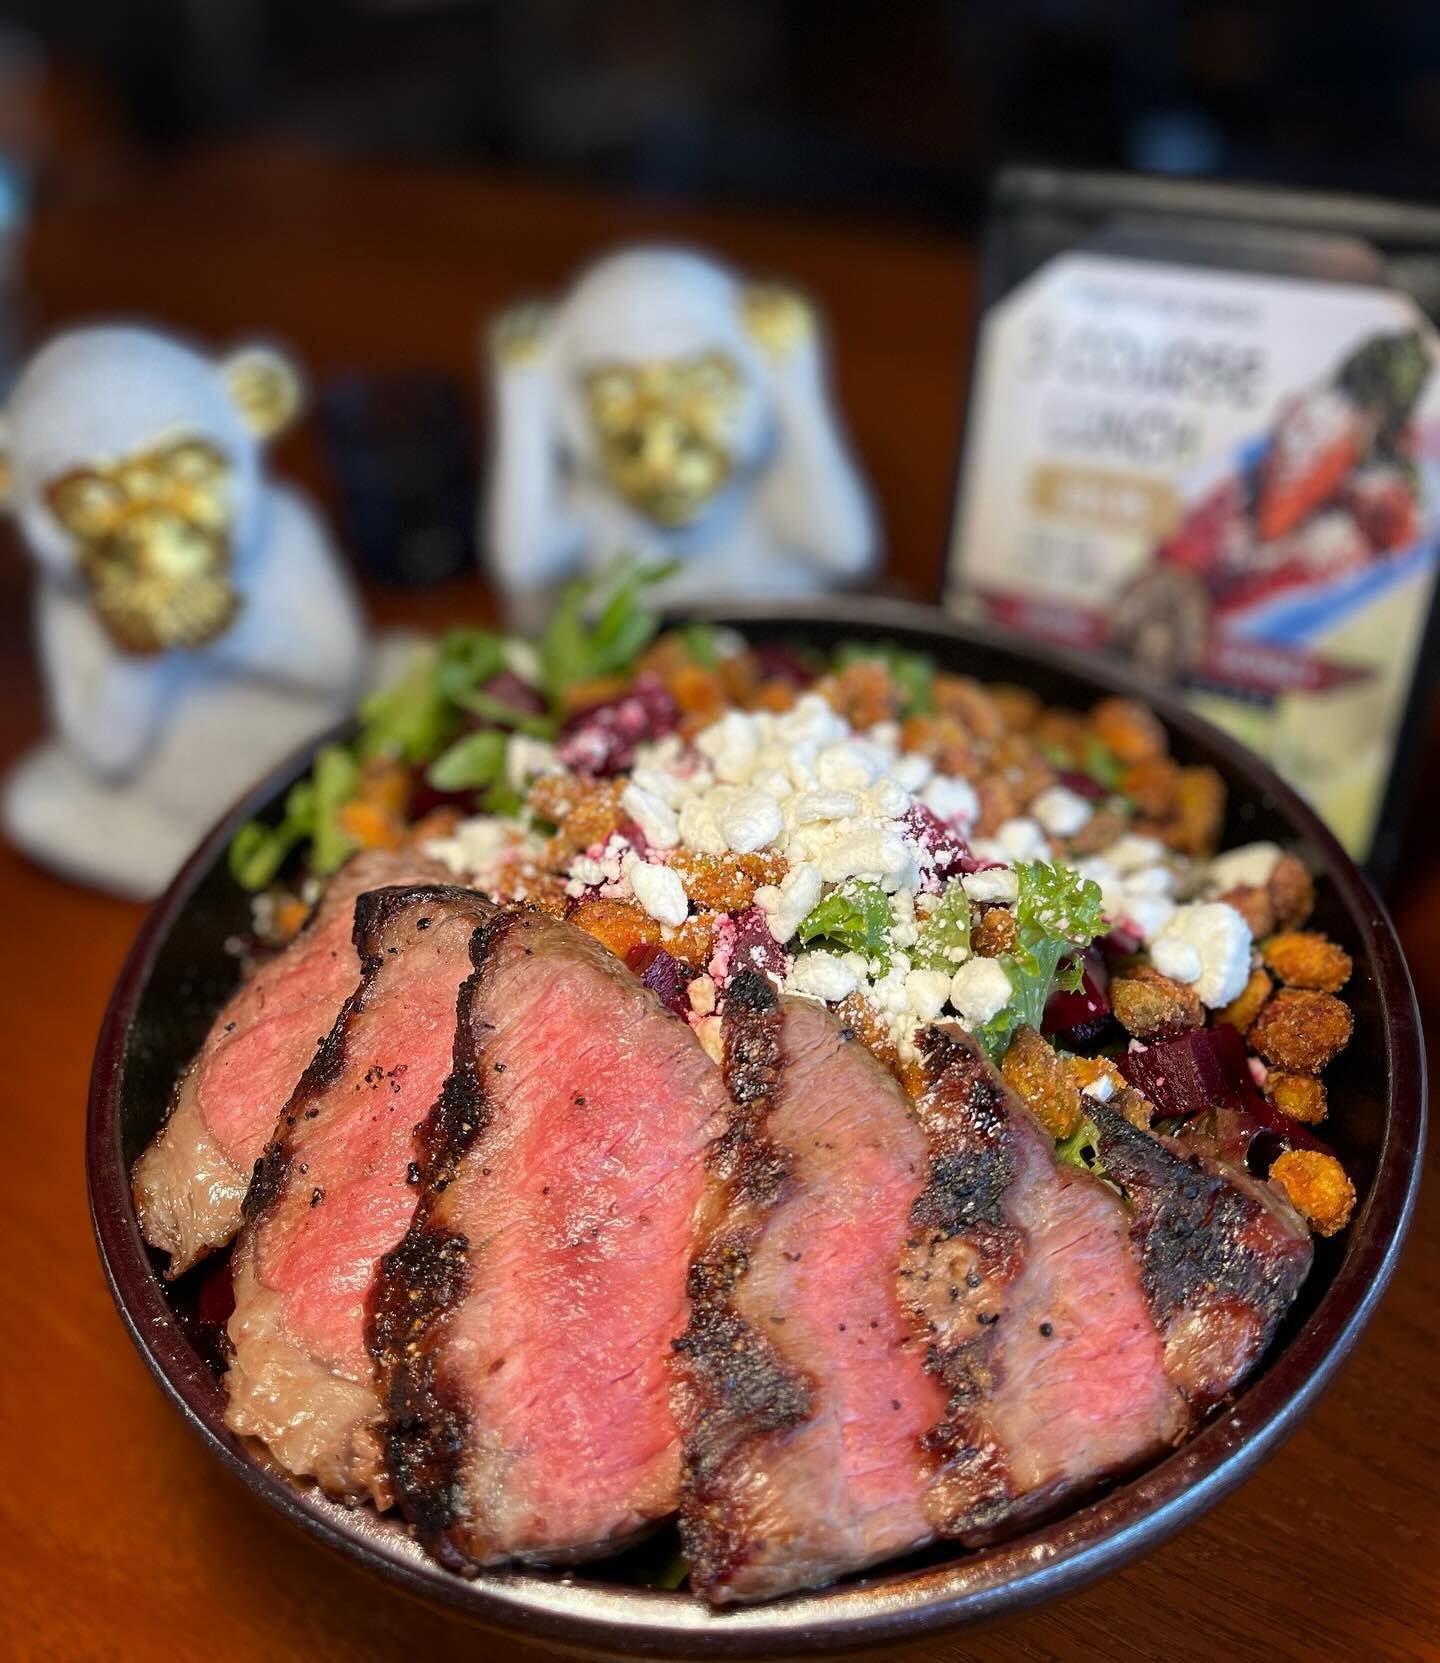 Pistachio Beet Salad- Mixed greens tossed with balsamic vinaigrette, topped with candied Cajun pistachios, roasted beets, crumbled goat cheese and a honey drizzle. Finished with a sliced 6 oz NY strip.